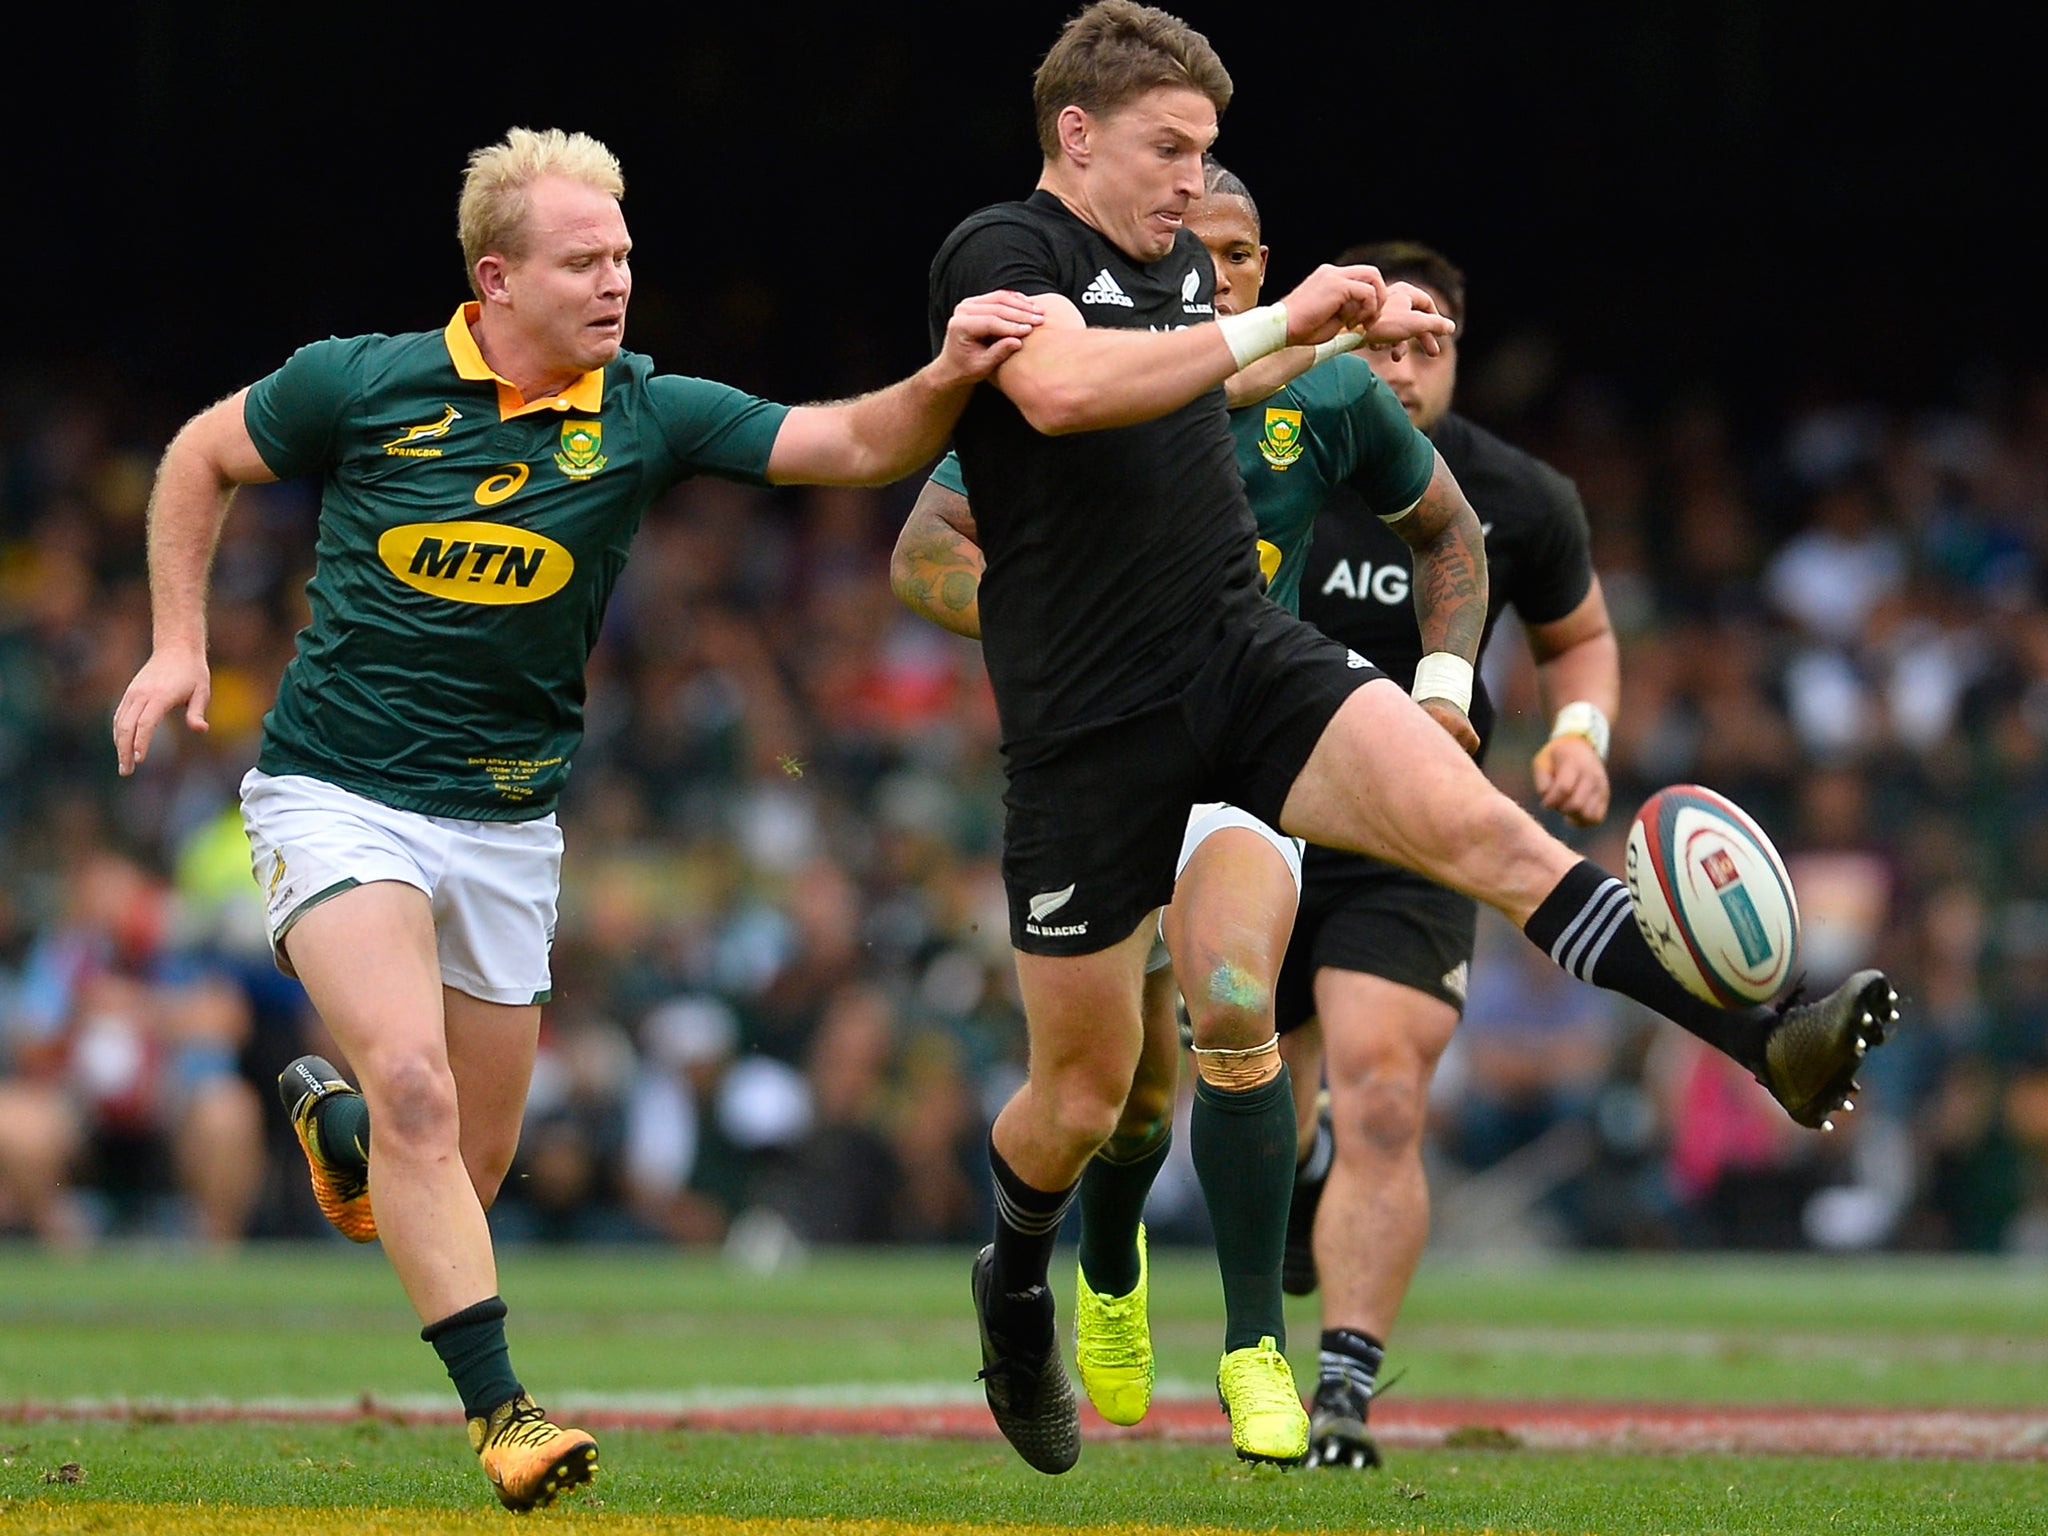 Barrett suffered a concussion in the Rugby Championship win over South Africa